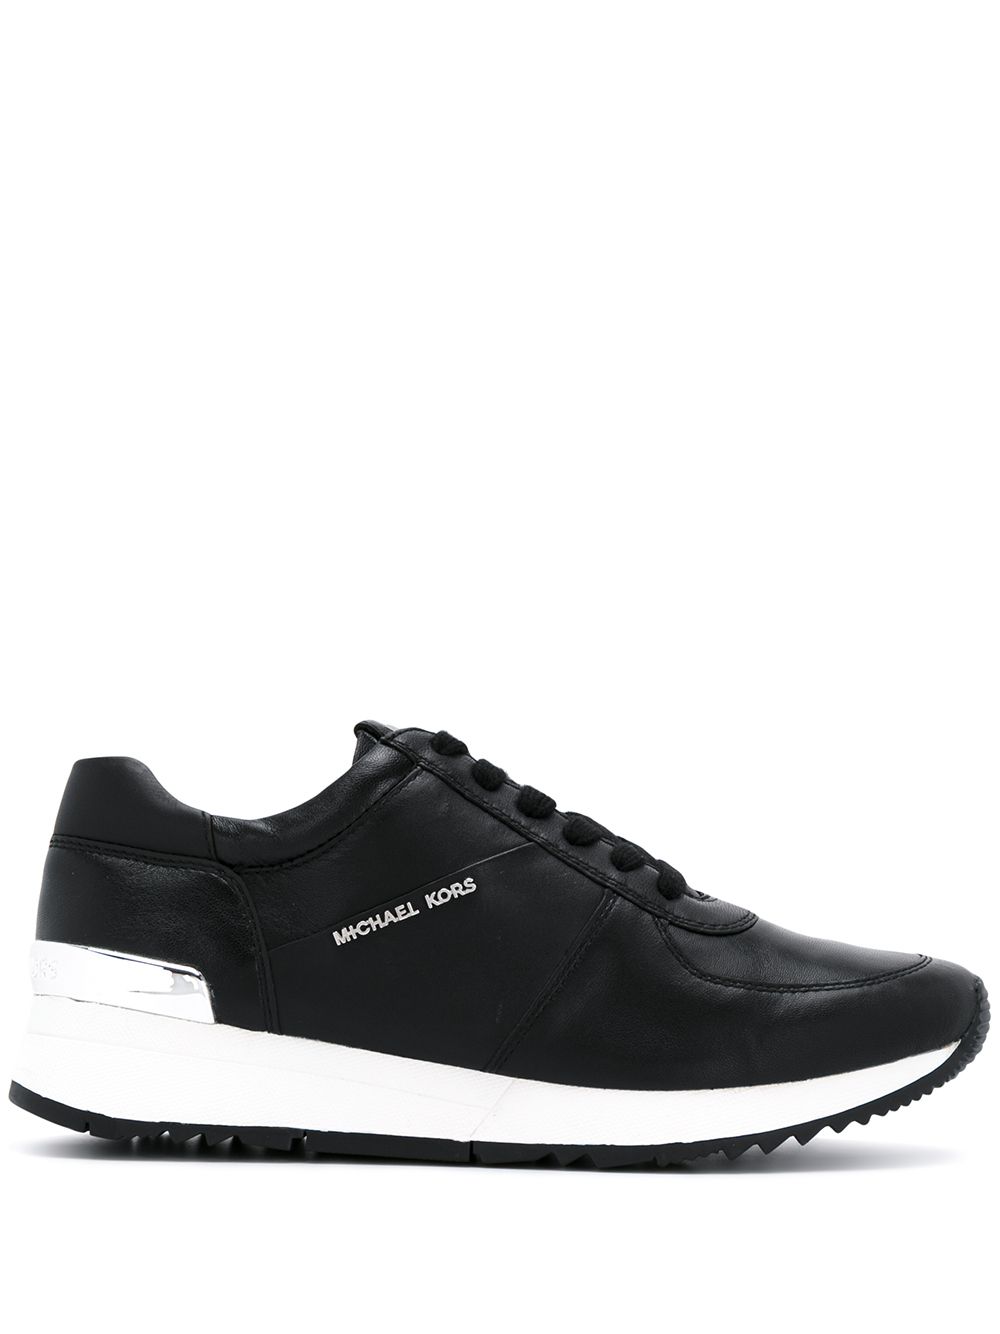 Michael Kors lace-up sneakers with logo - Black